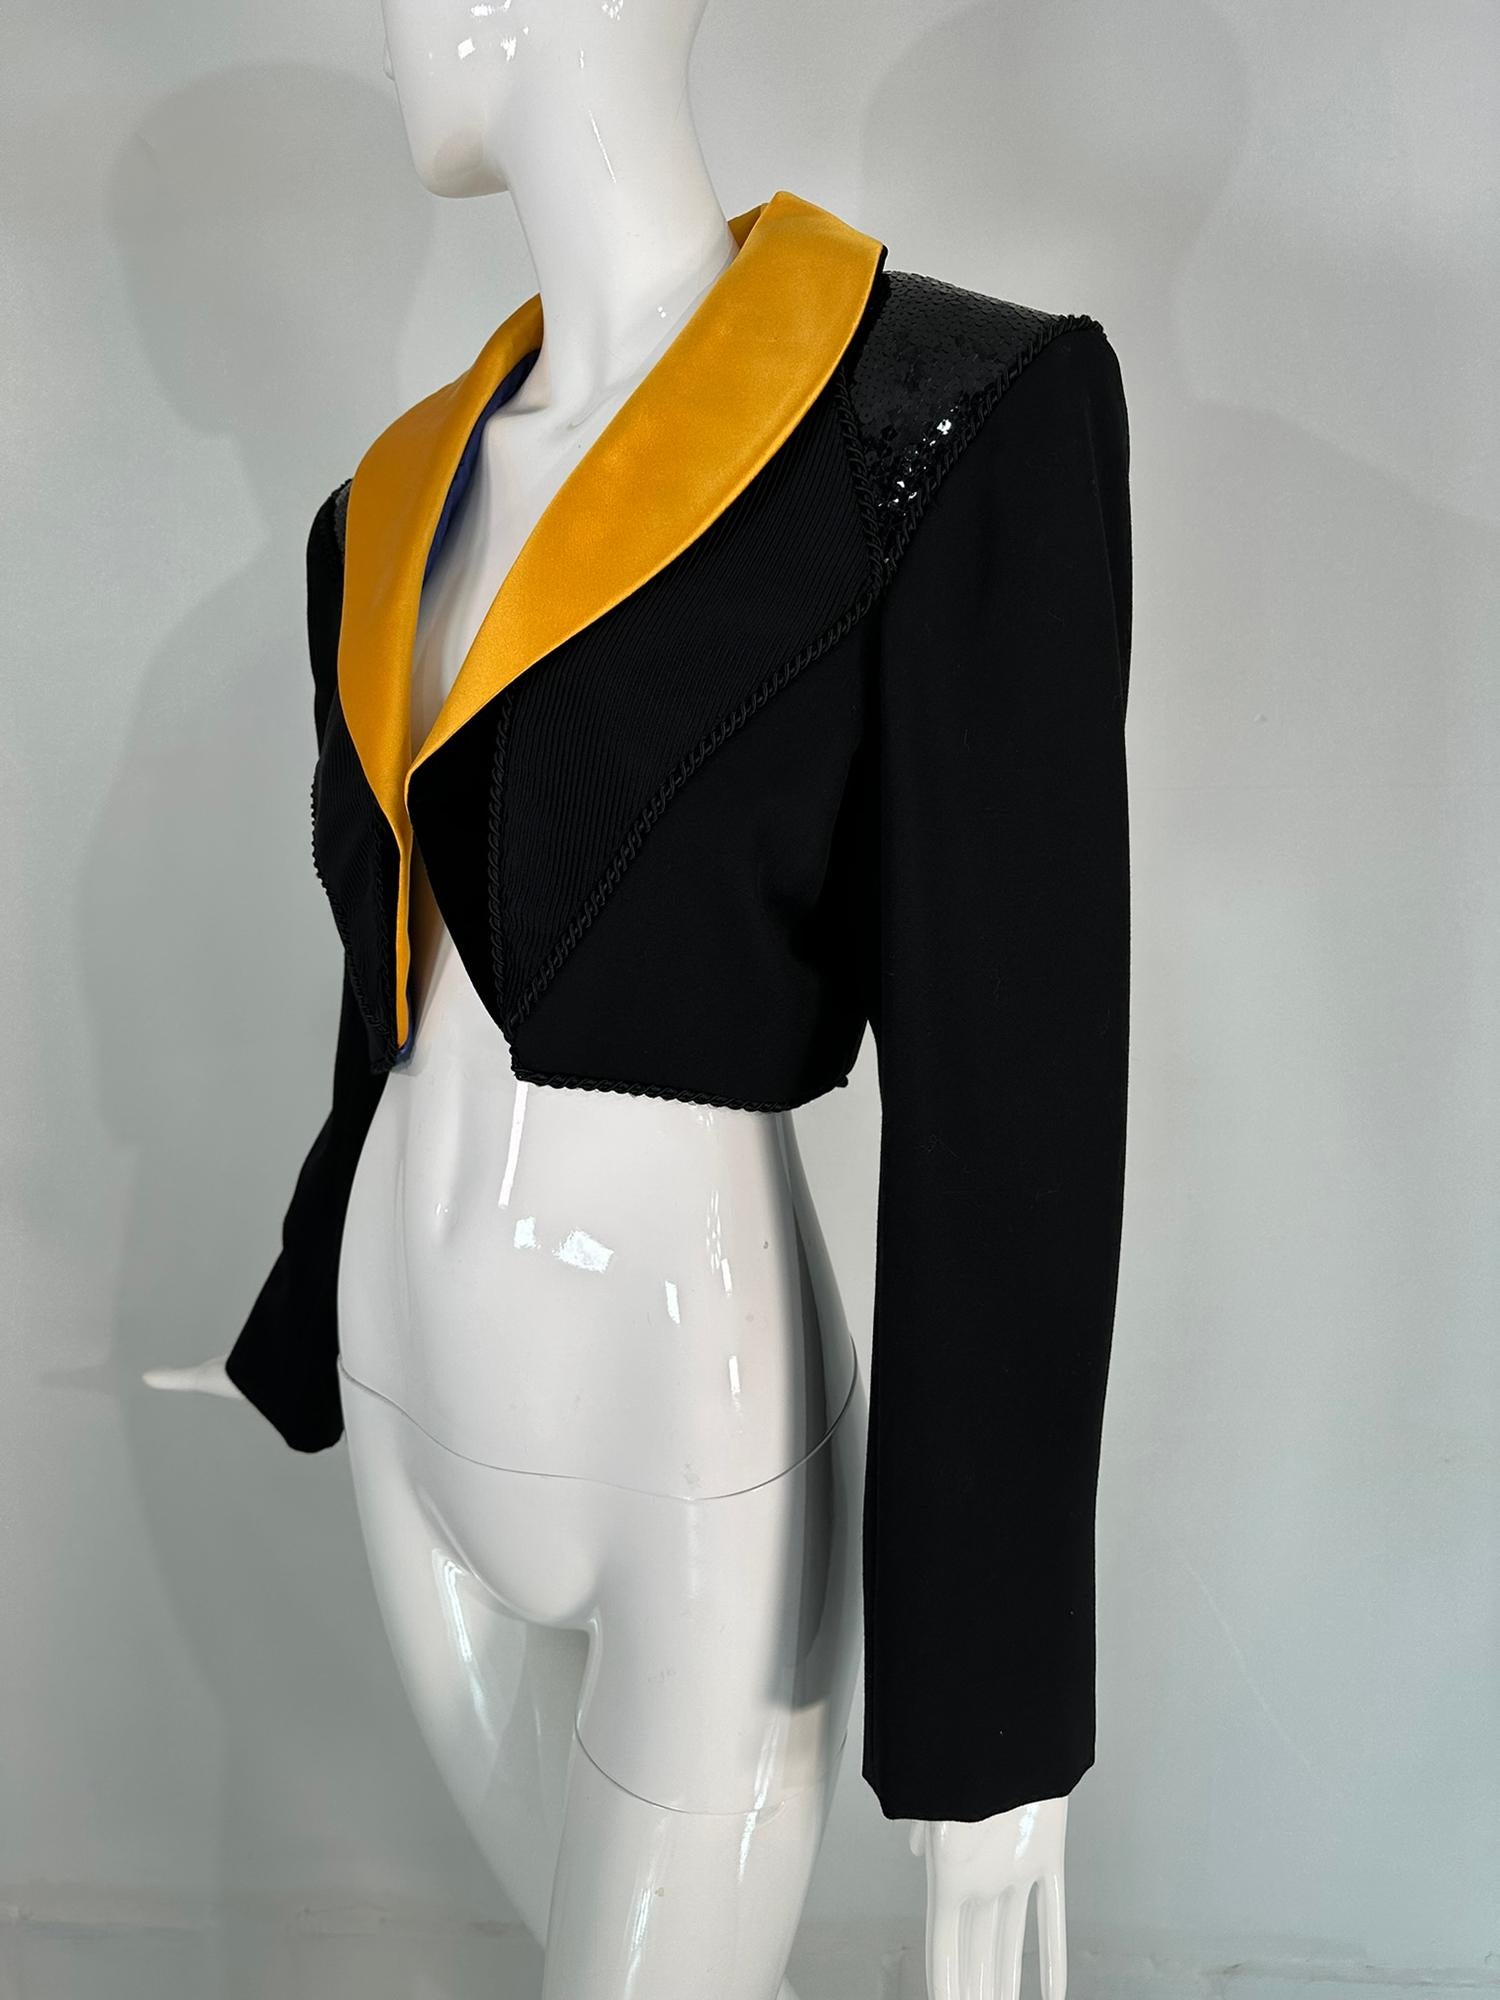 Yves Saint Laurent Rive Gauche Black Sequin Yellow Satin Cropped Jacket 1990s In Good Condition For Sale In West Palm Beach, FL